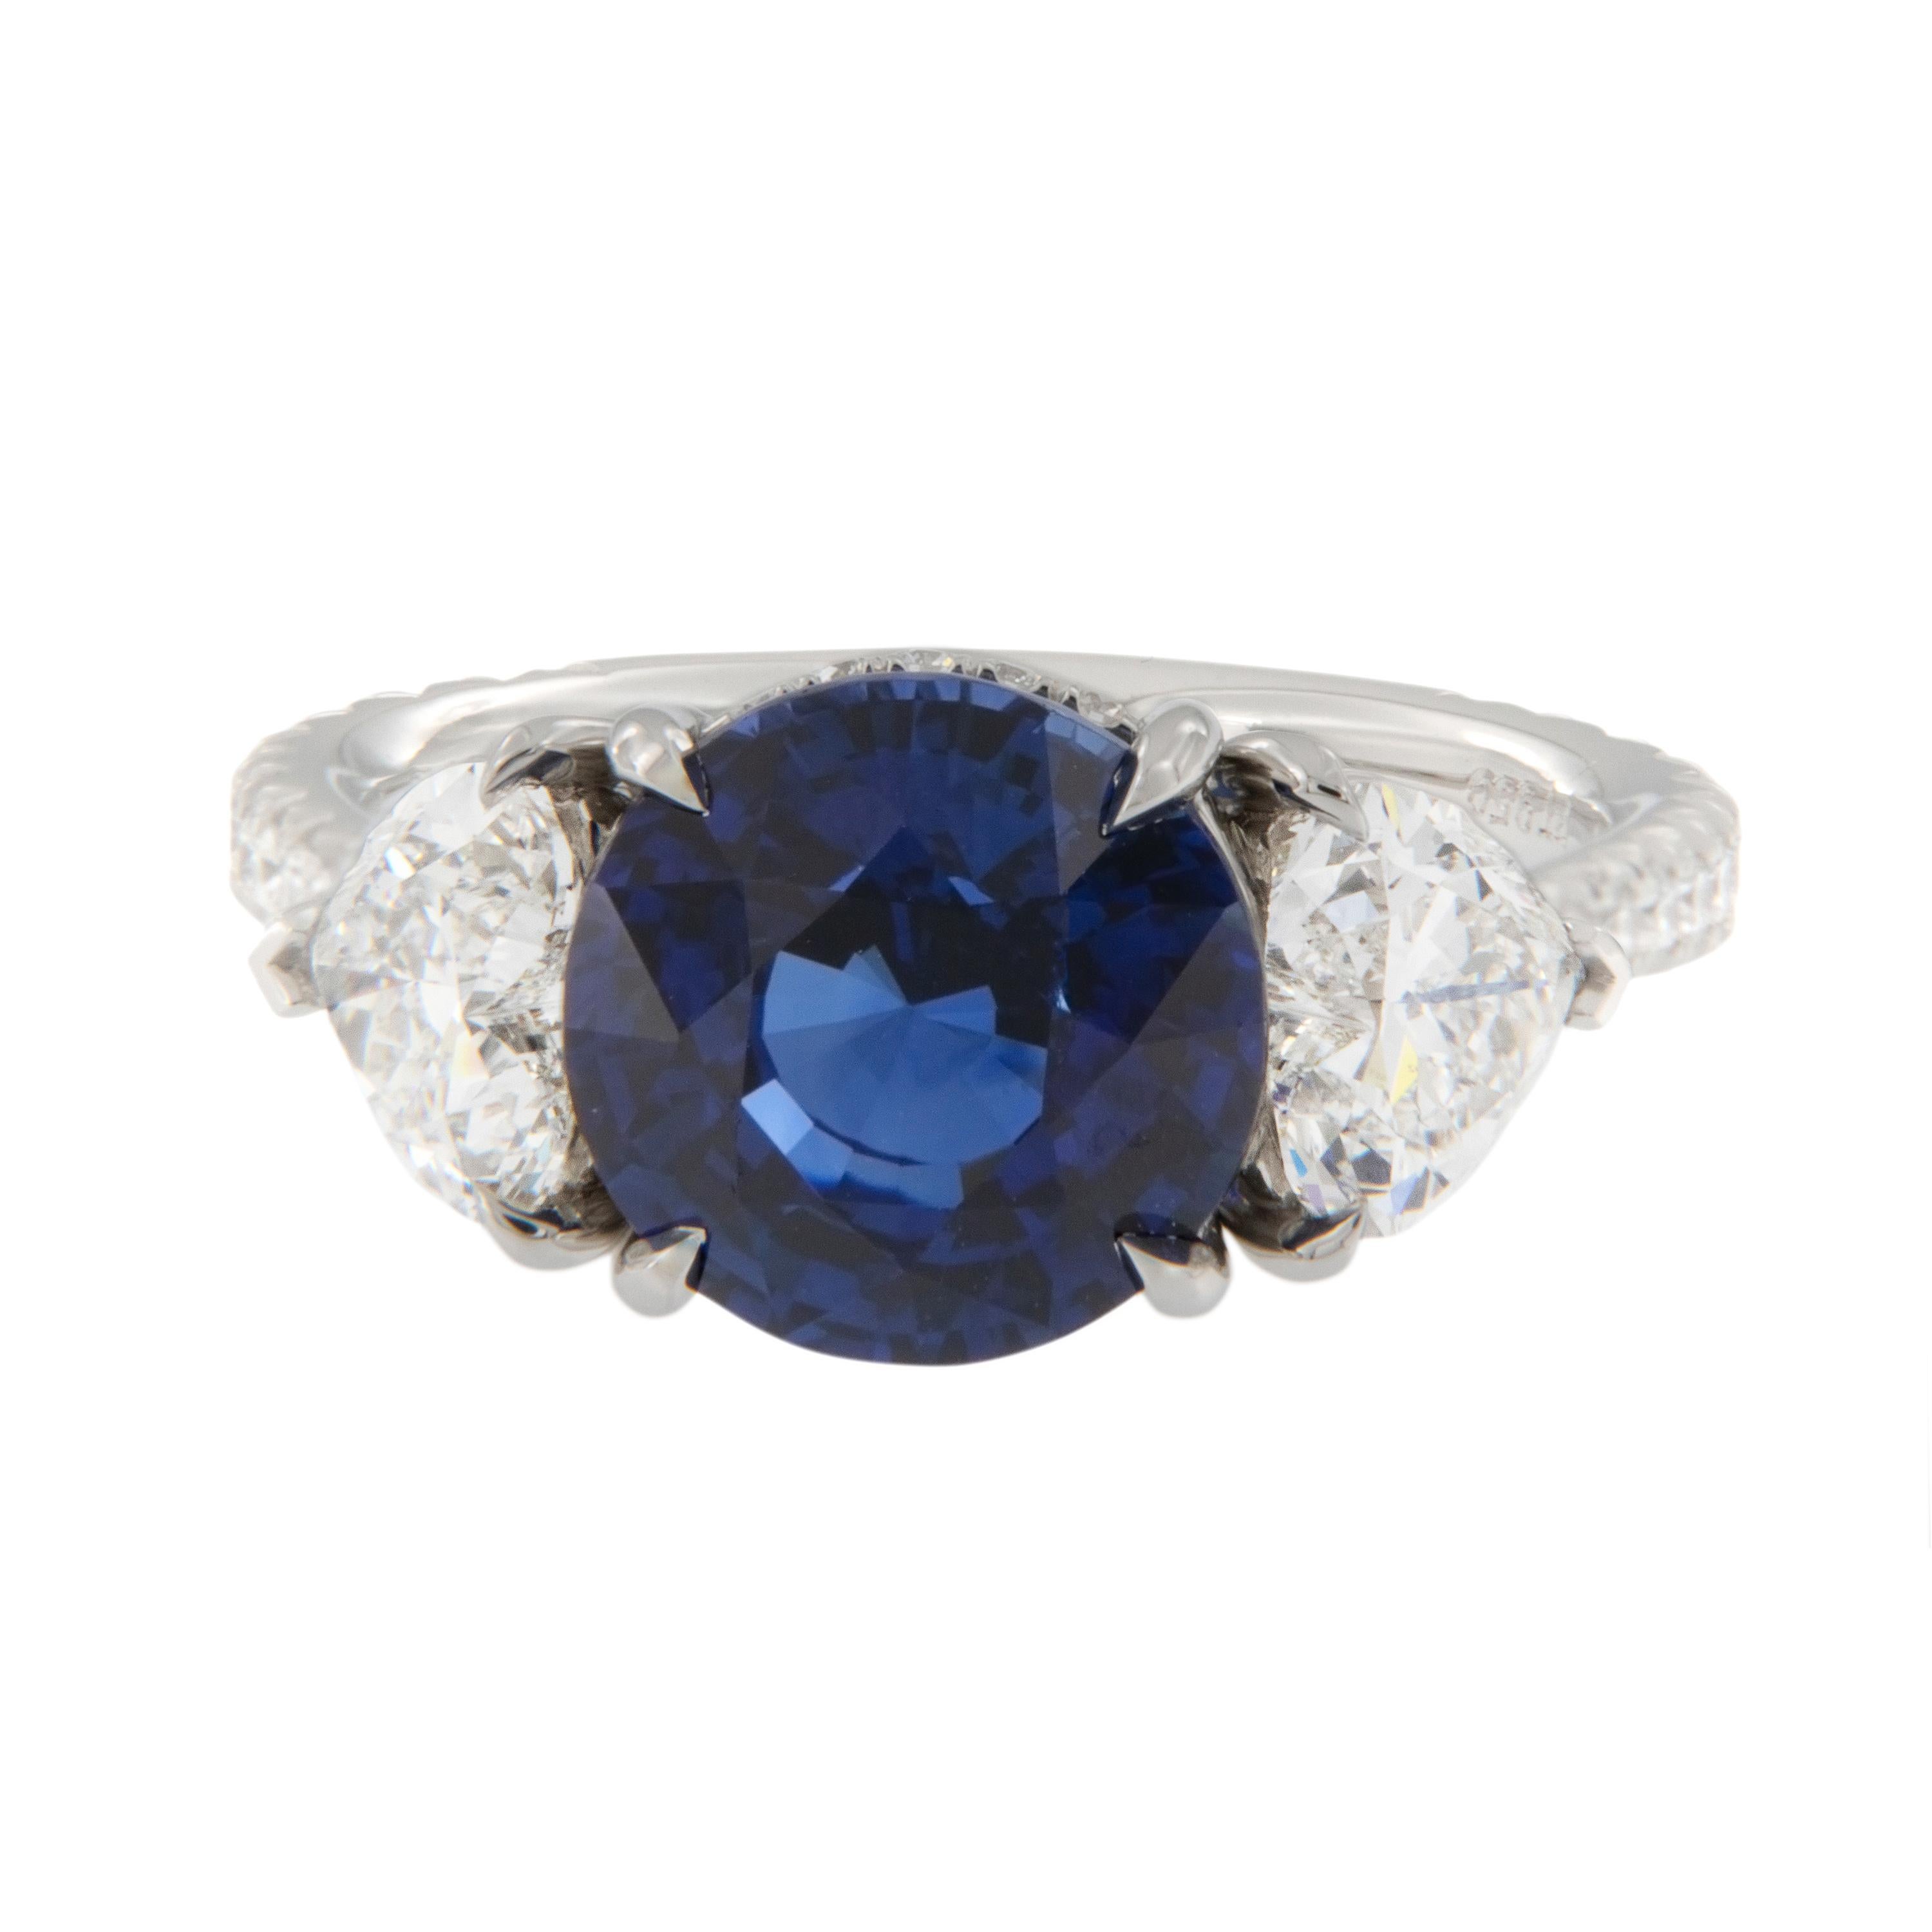 Platinum round blue sapphire (5.57Ct), 2 heart shape diamonds (1.61 Ct) and 0.40 Cttw diamond ring. Handmade in New York by William Rosenberg this once in a lifetime ring is the best of the best! The classic style ring is this beautiful blue